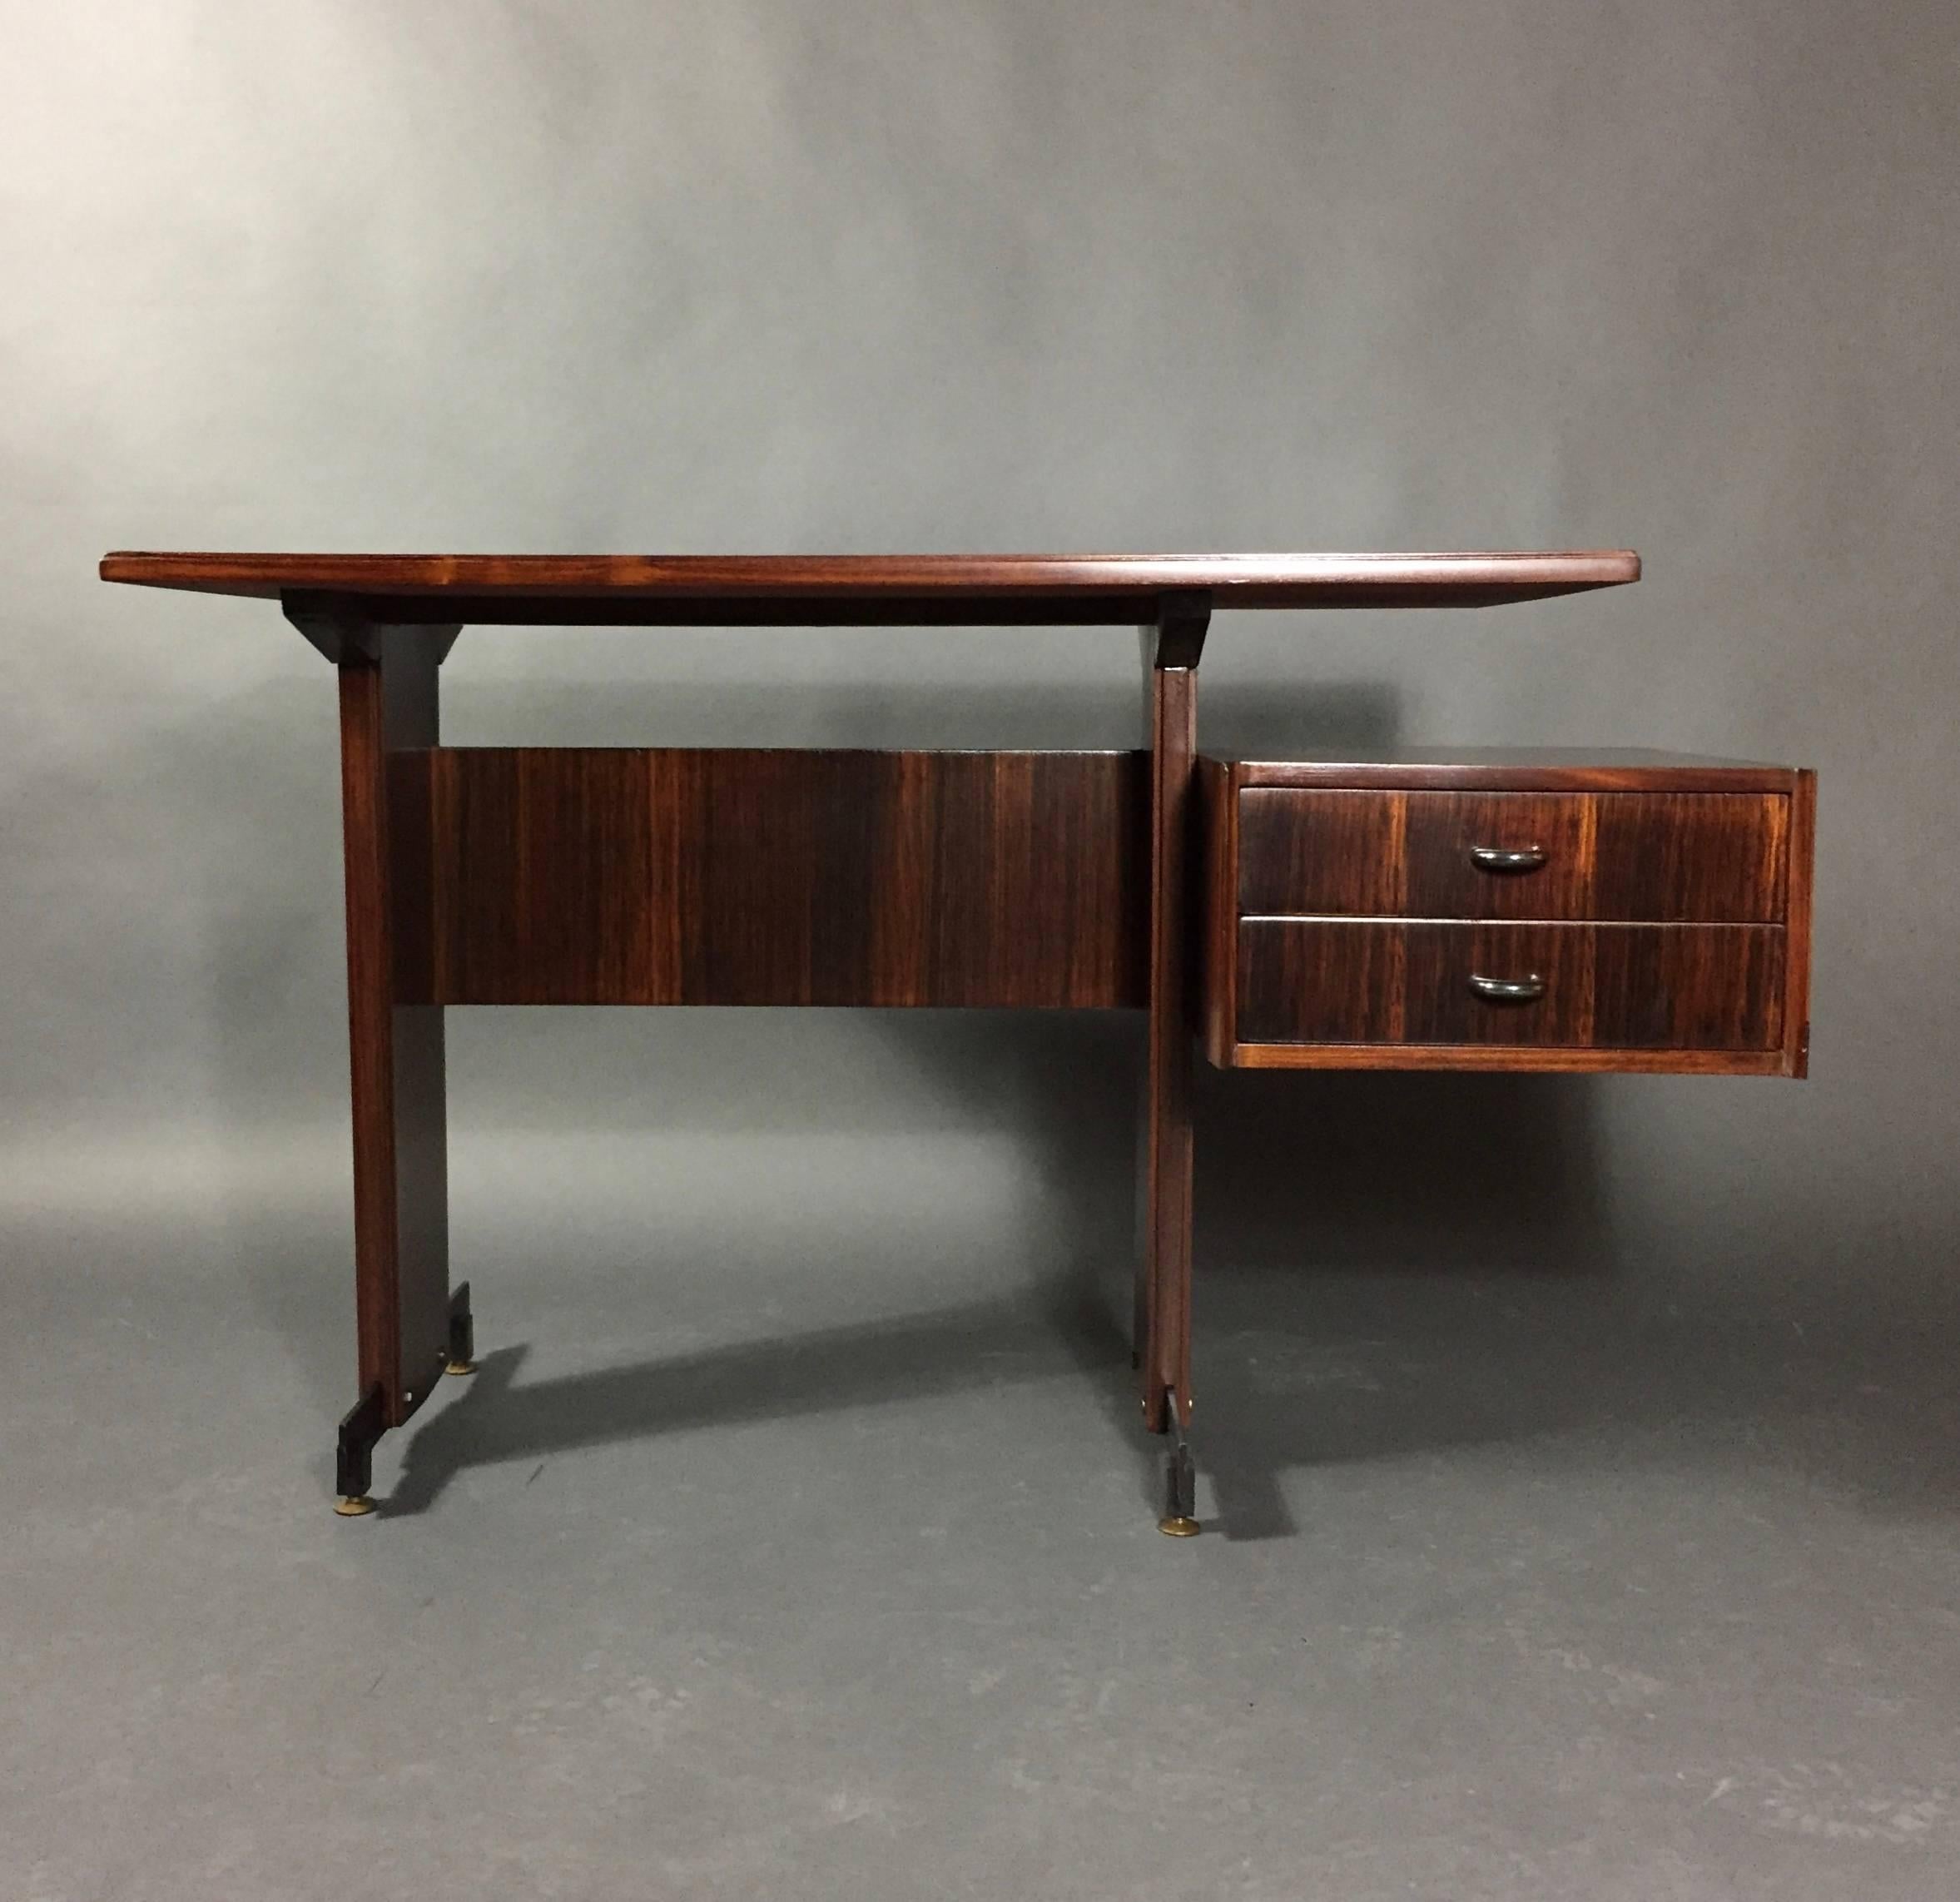 Traditionally made as a dressing table, this nicely proportioned piece can be perfect as a small hall table or desk. Recently refinished dark-stained mahogany with black powder-coated metal supports and brass feet. Possibly Scandinavian, though more